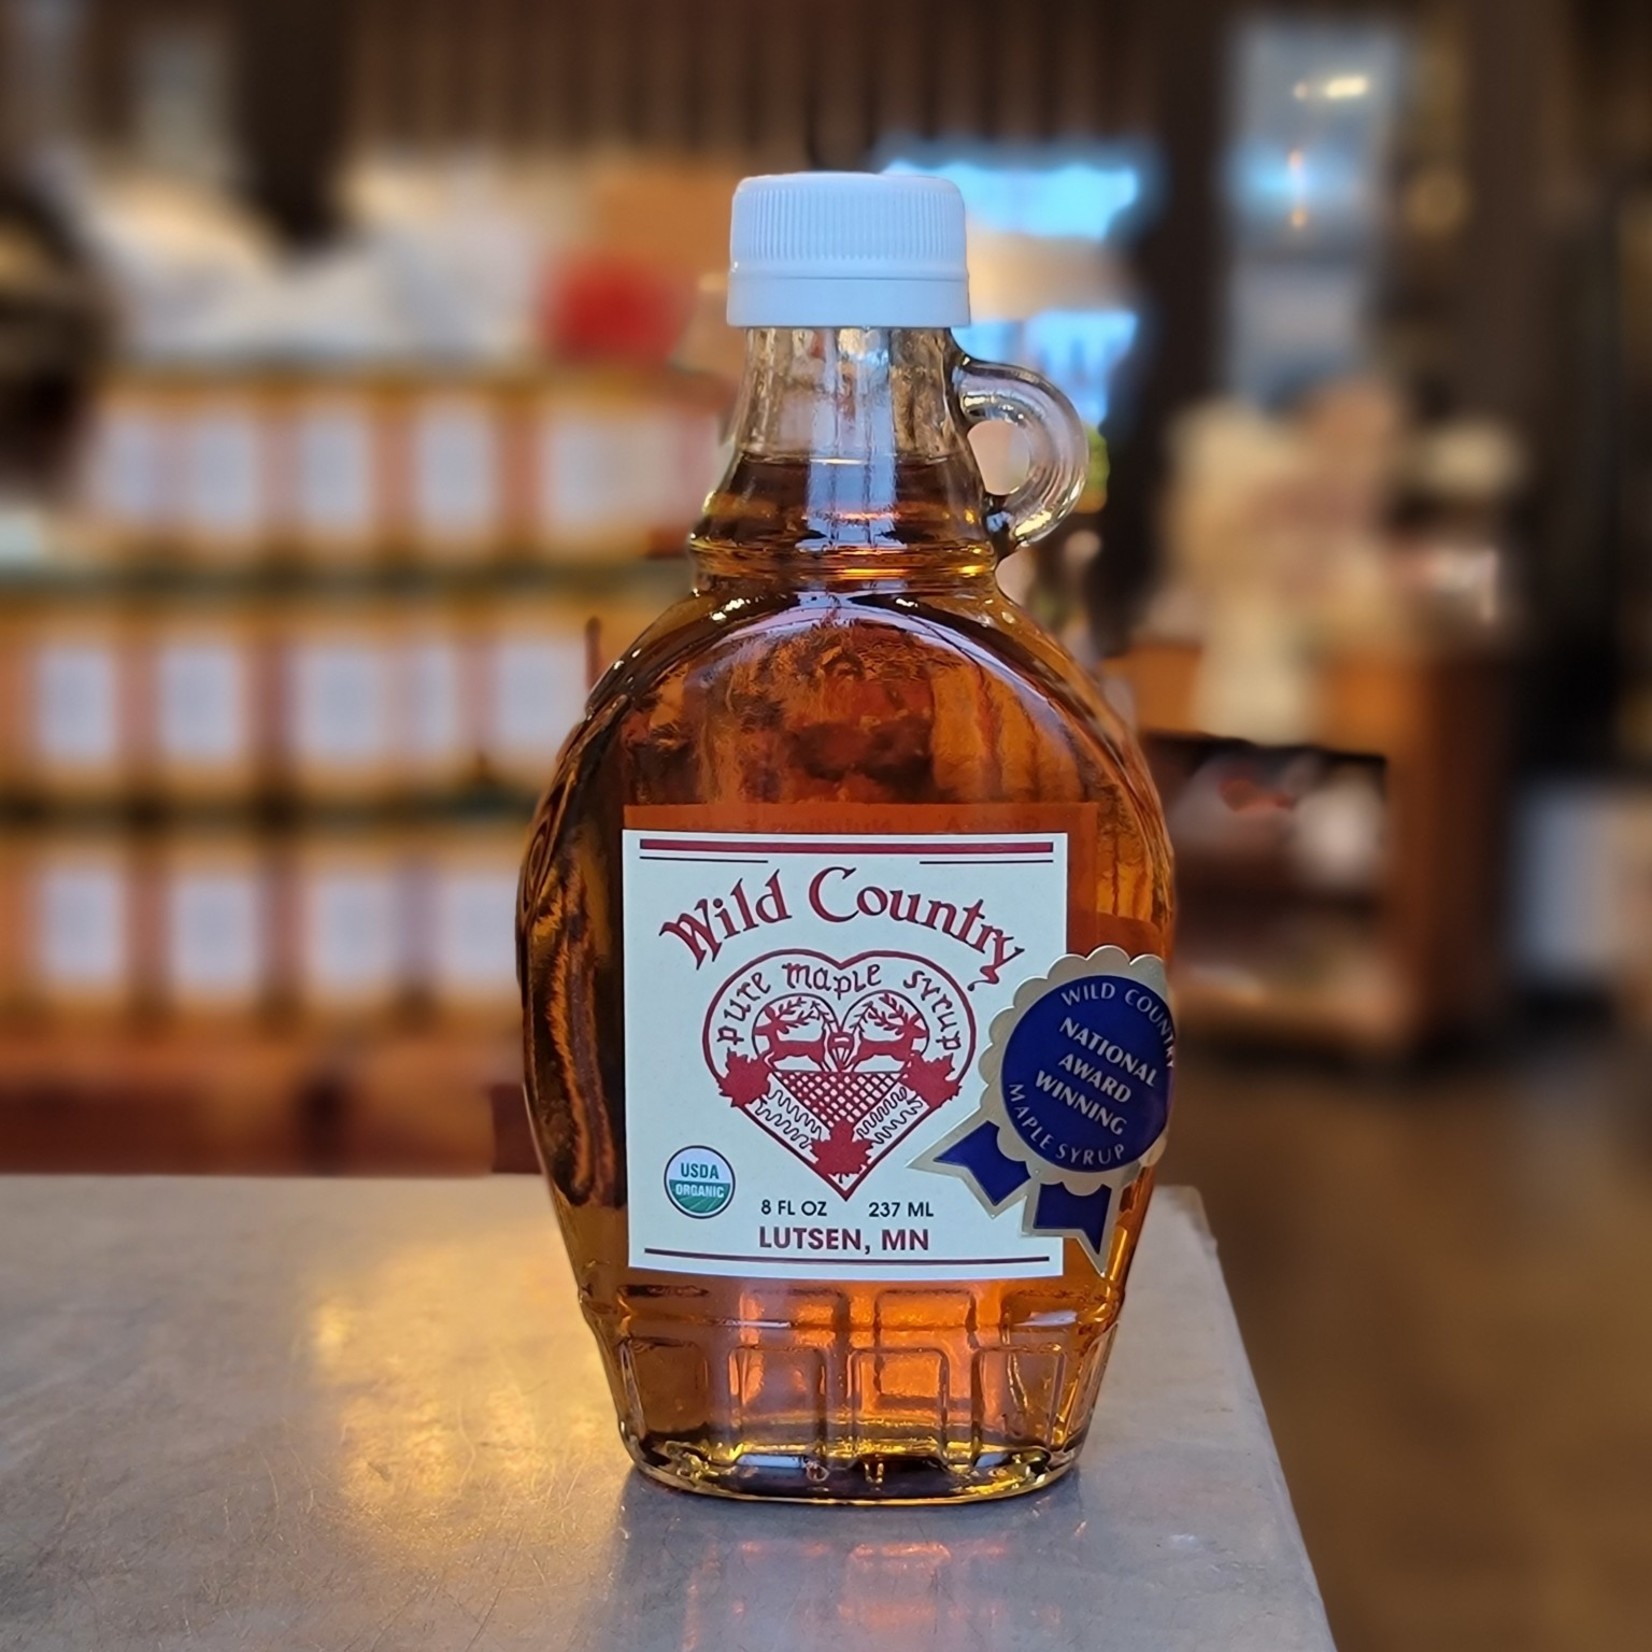 Wild Country Maple Wild Country Maple Syrup - 8 Oz.